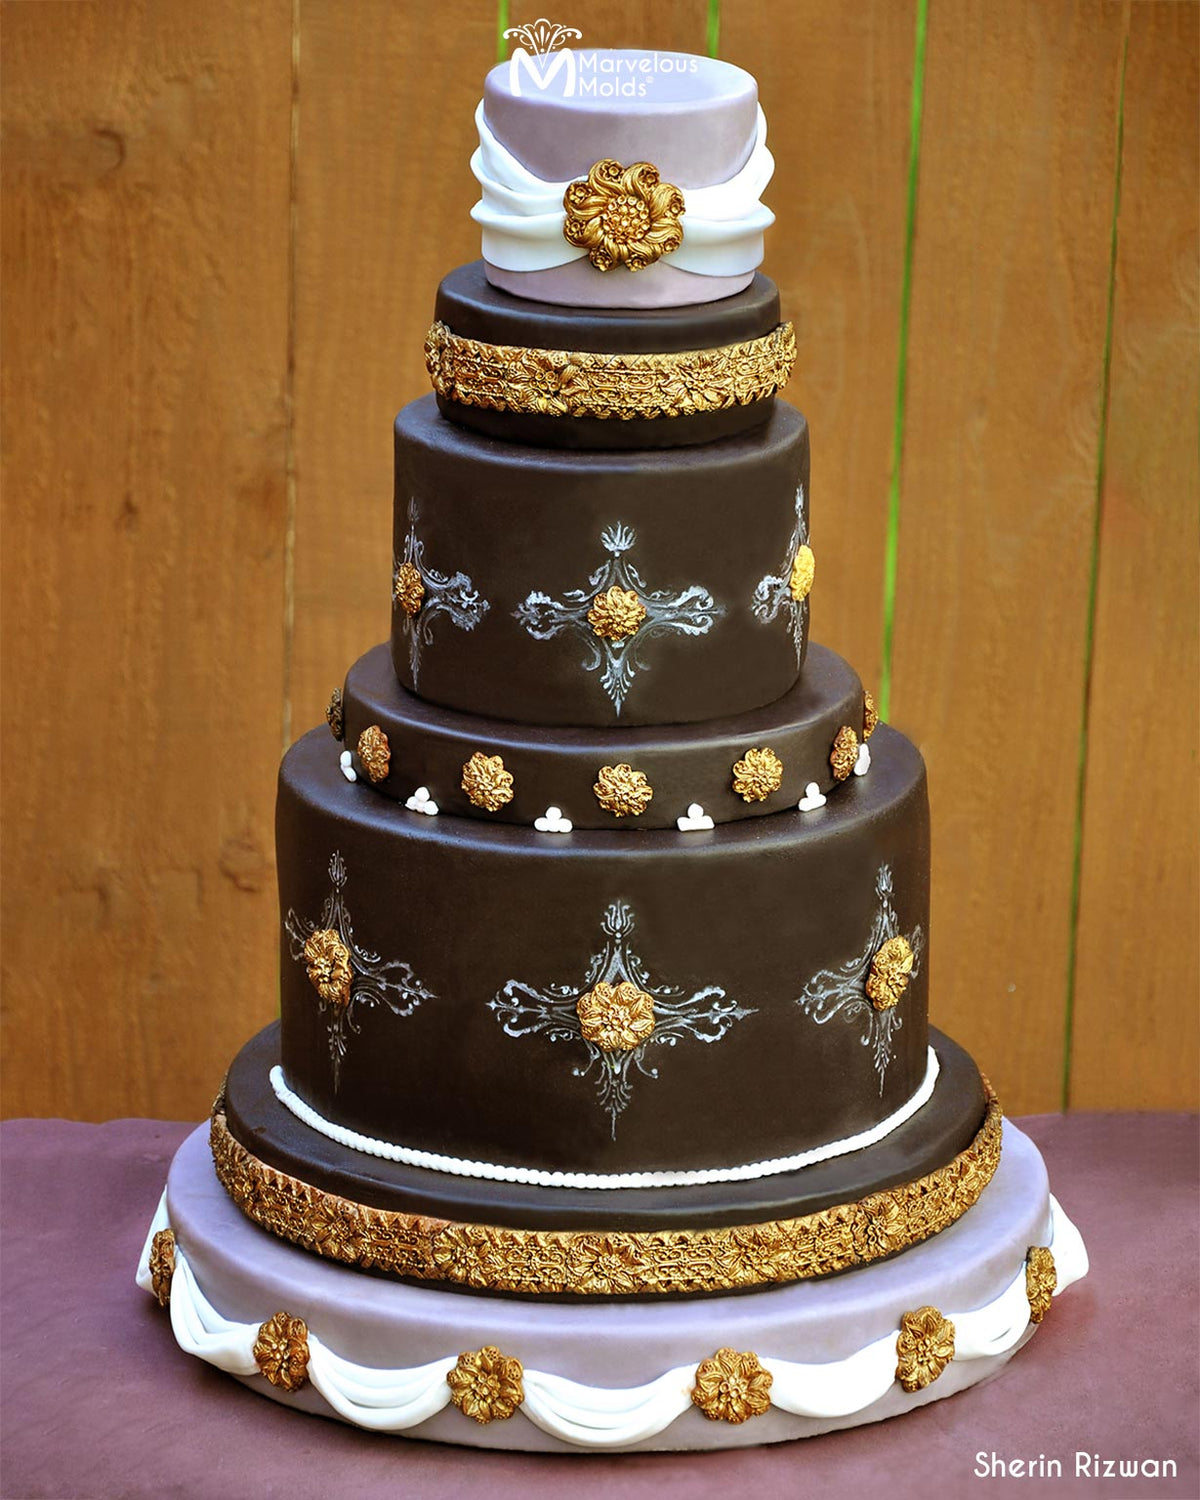 Wedding Cake Decorated with Gold Embellishments, Created With Marvelous Molds Arabesque Small and Medium Floral Medallions